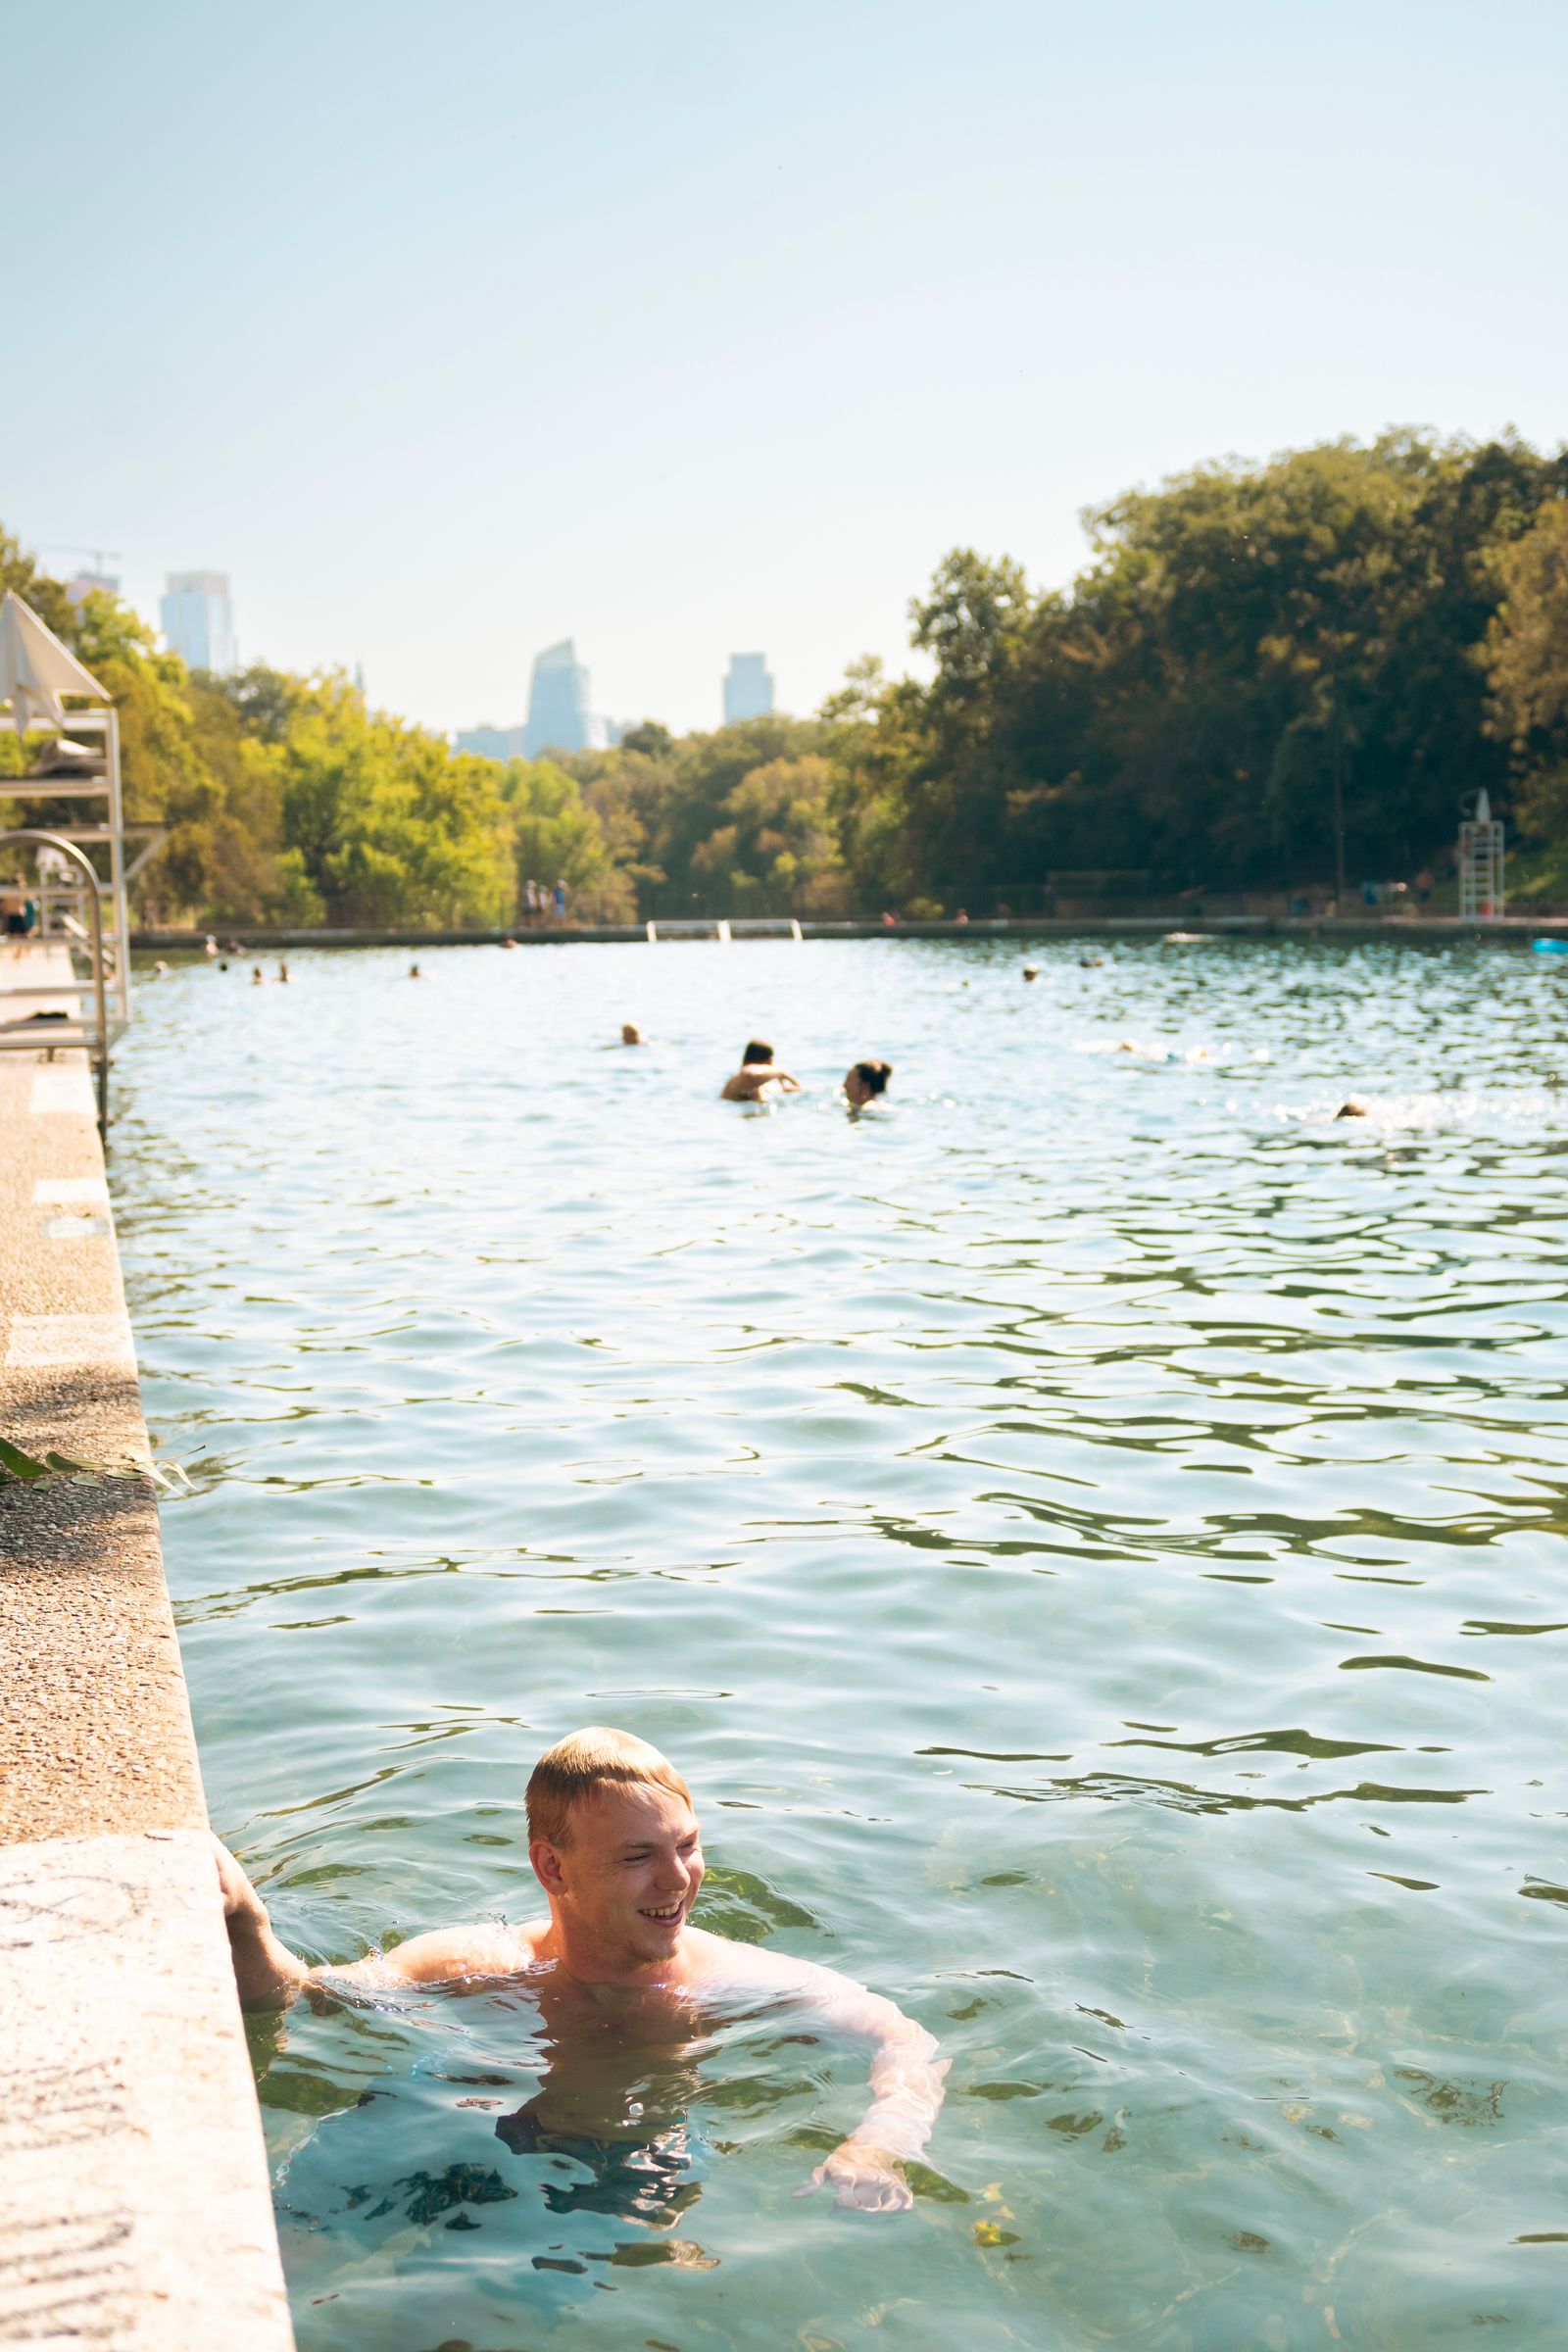 A man holding onto the ledge of the pool at Barton Springs, with the city in the background